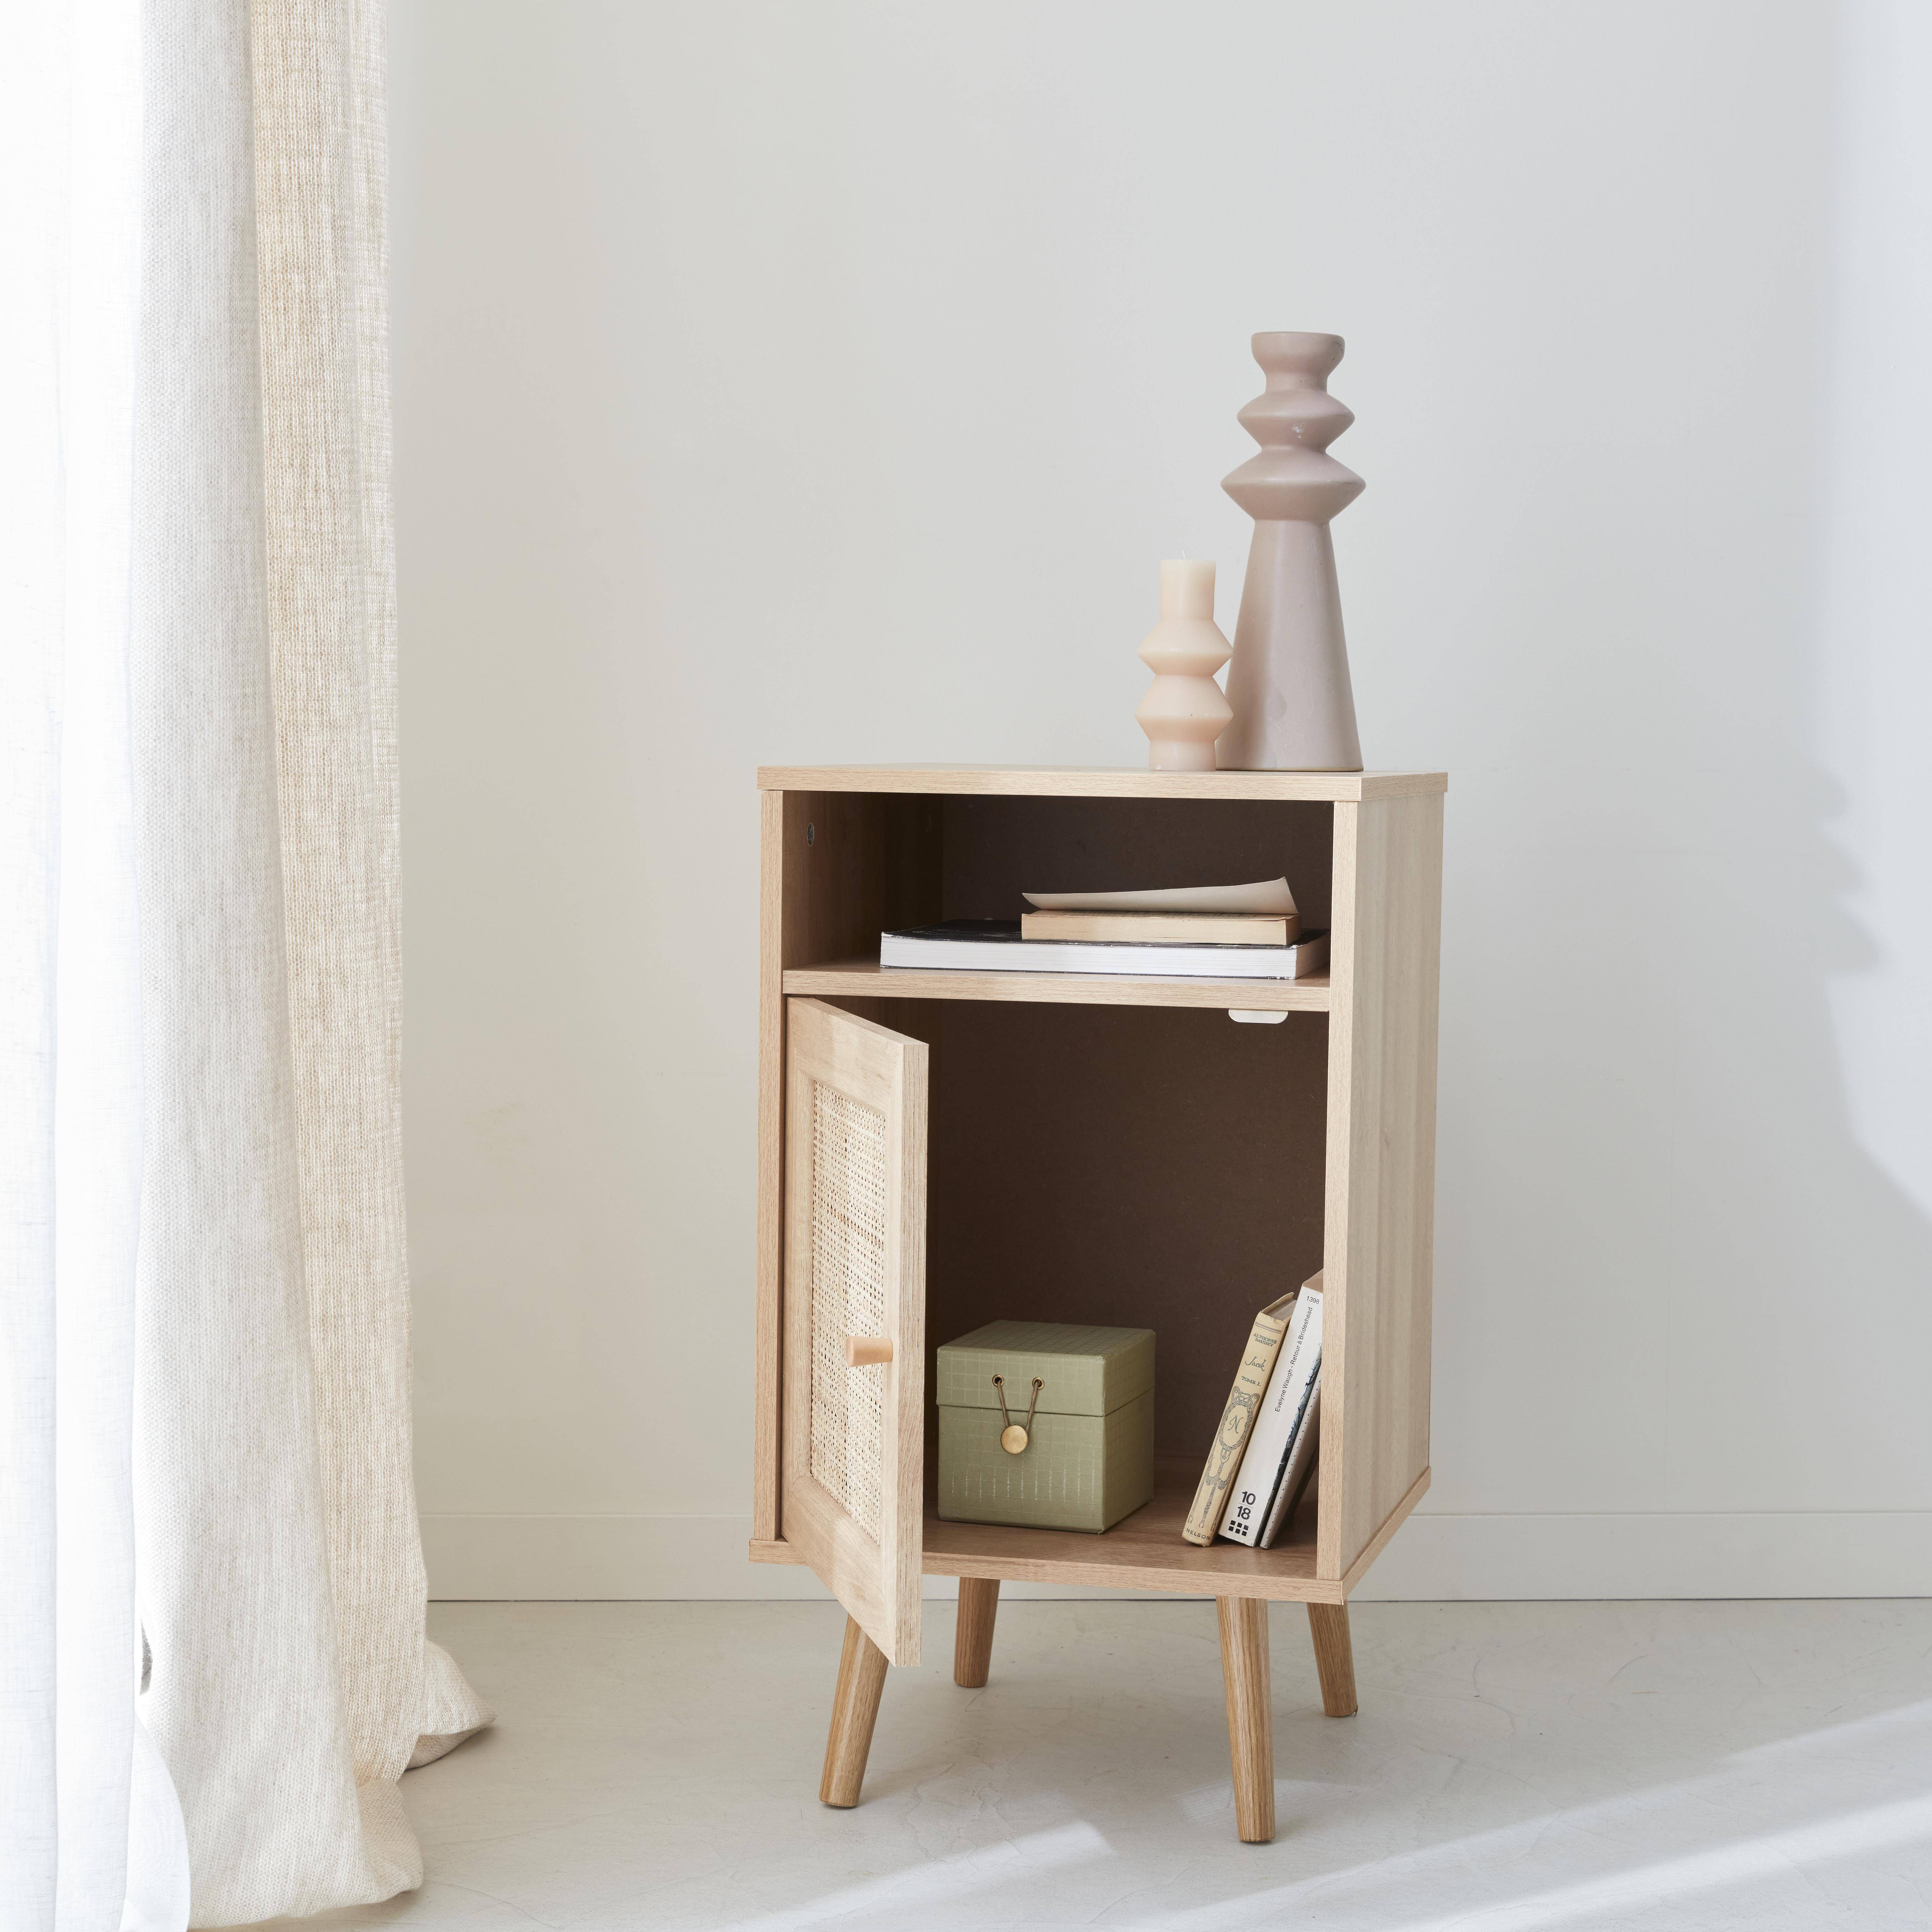 Pair of Scandi-style wood and cane rattan bedside tables with cupboard, 40x39x70cm - Boheme - Natural Wood colour,sweeek,Photo3